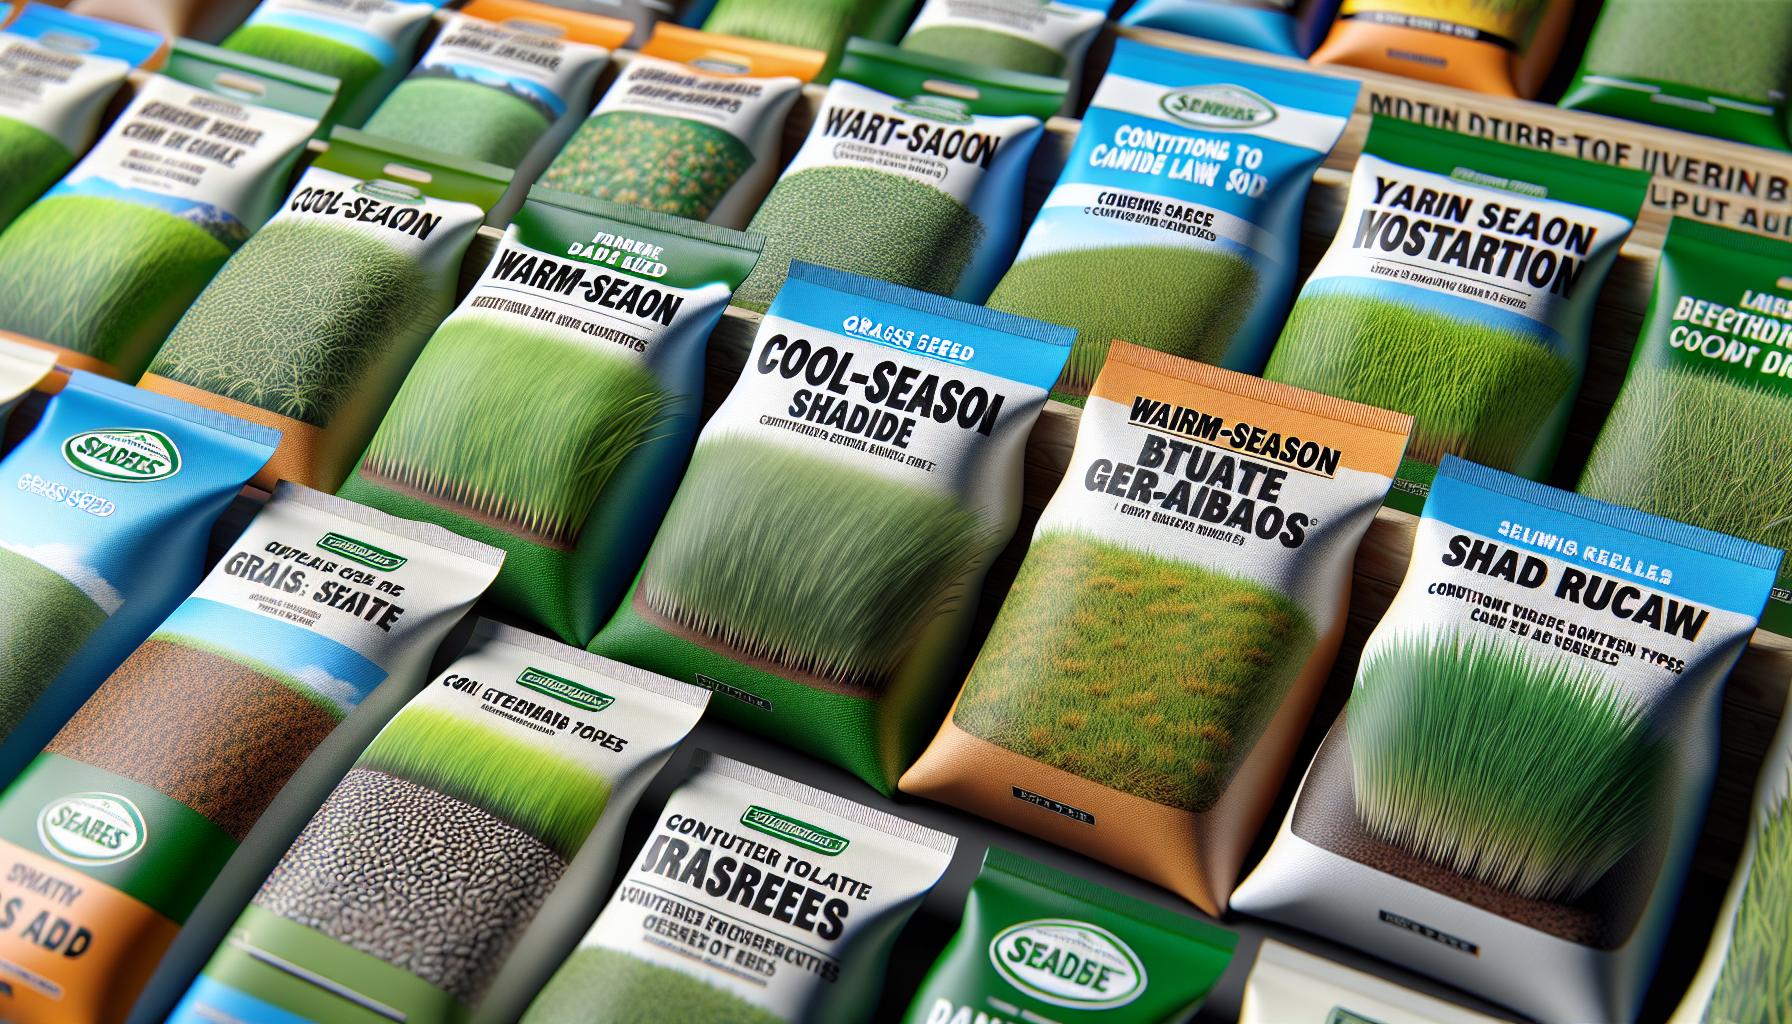 variety of grass seed packages gardening